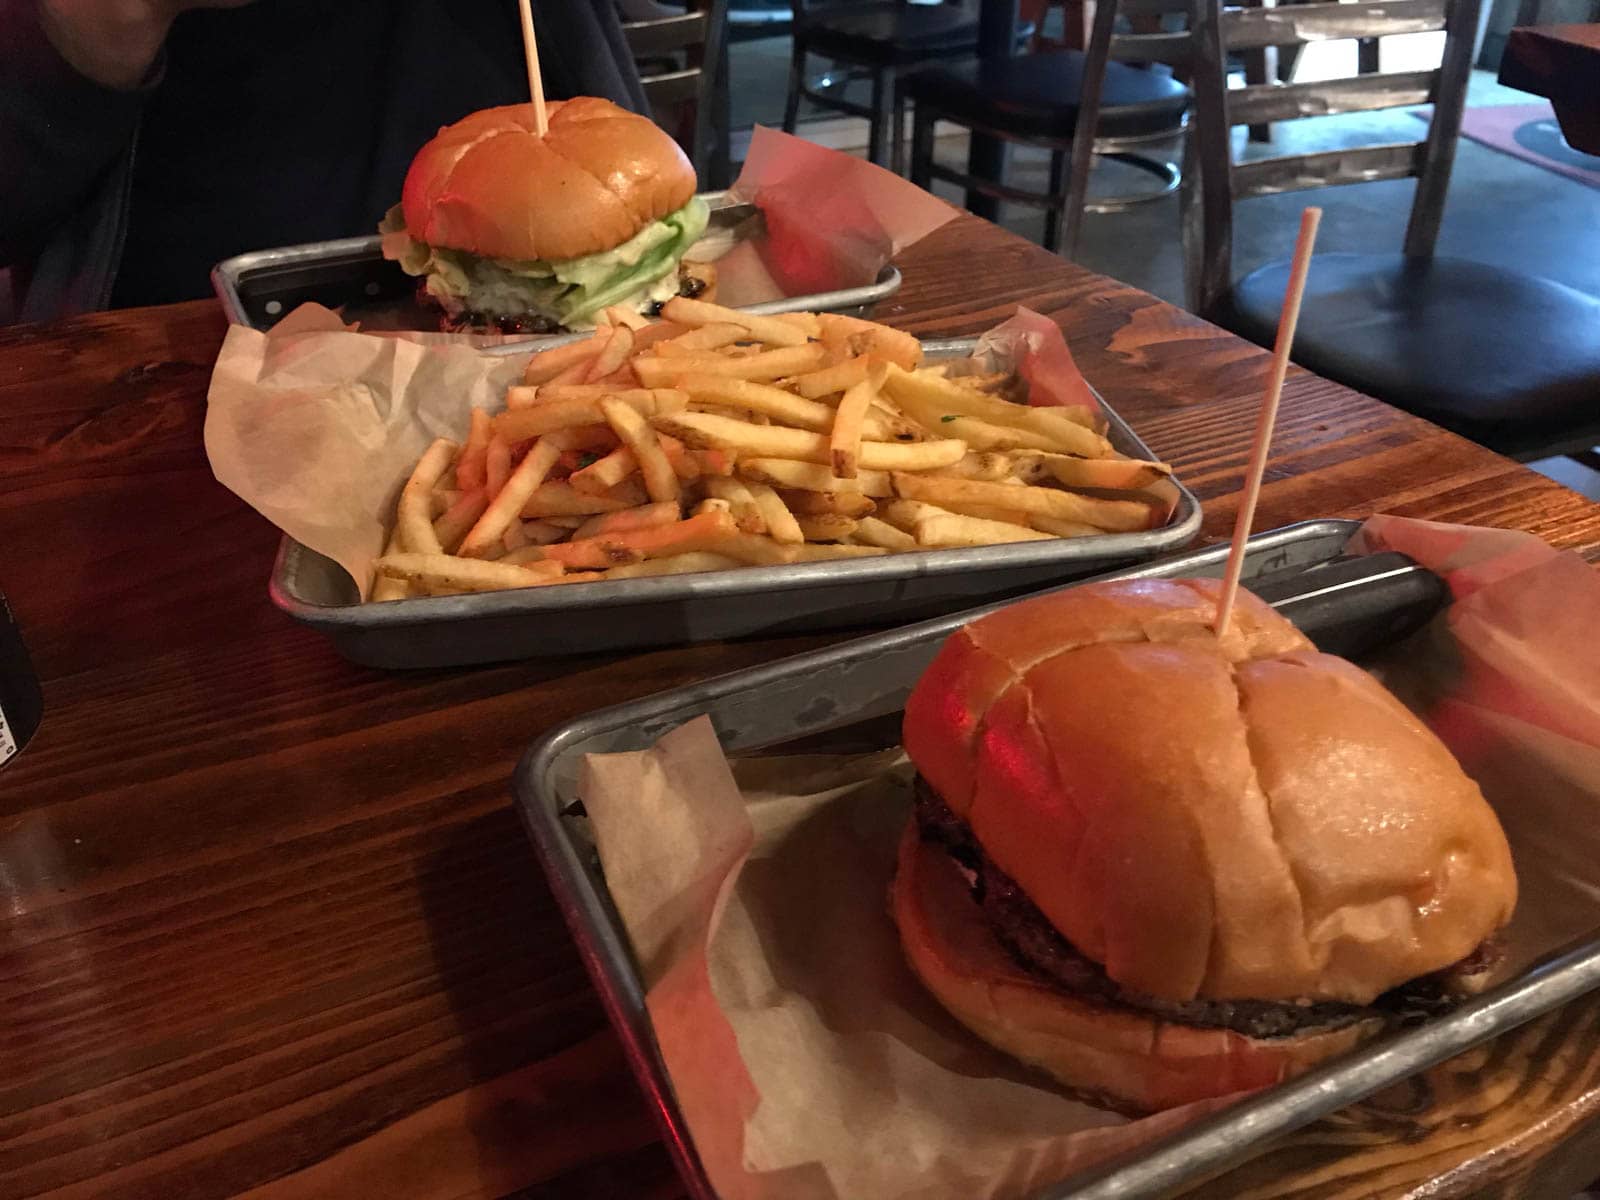 Three silver trays on a wooden table. Two of the trays have burgers in them, held together with a skewer. The other tray in the middle of the table has a load of fries on it.